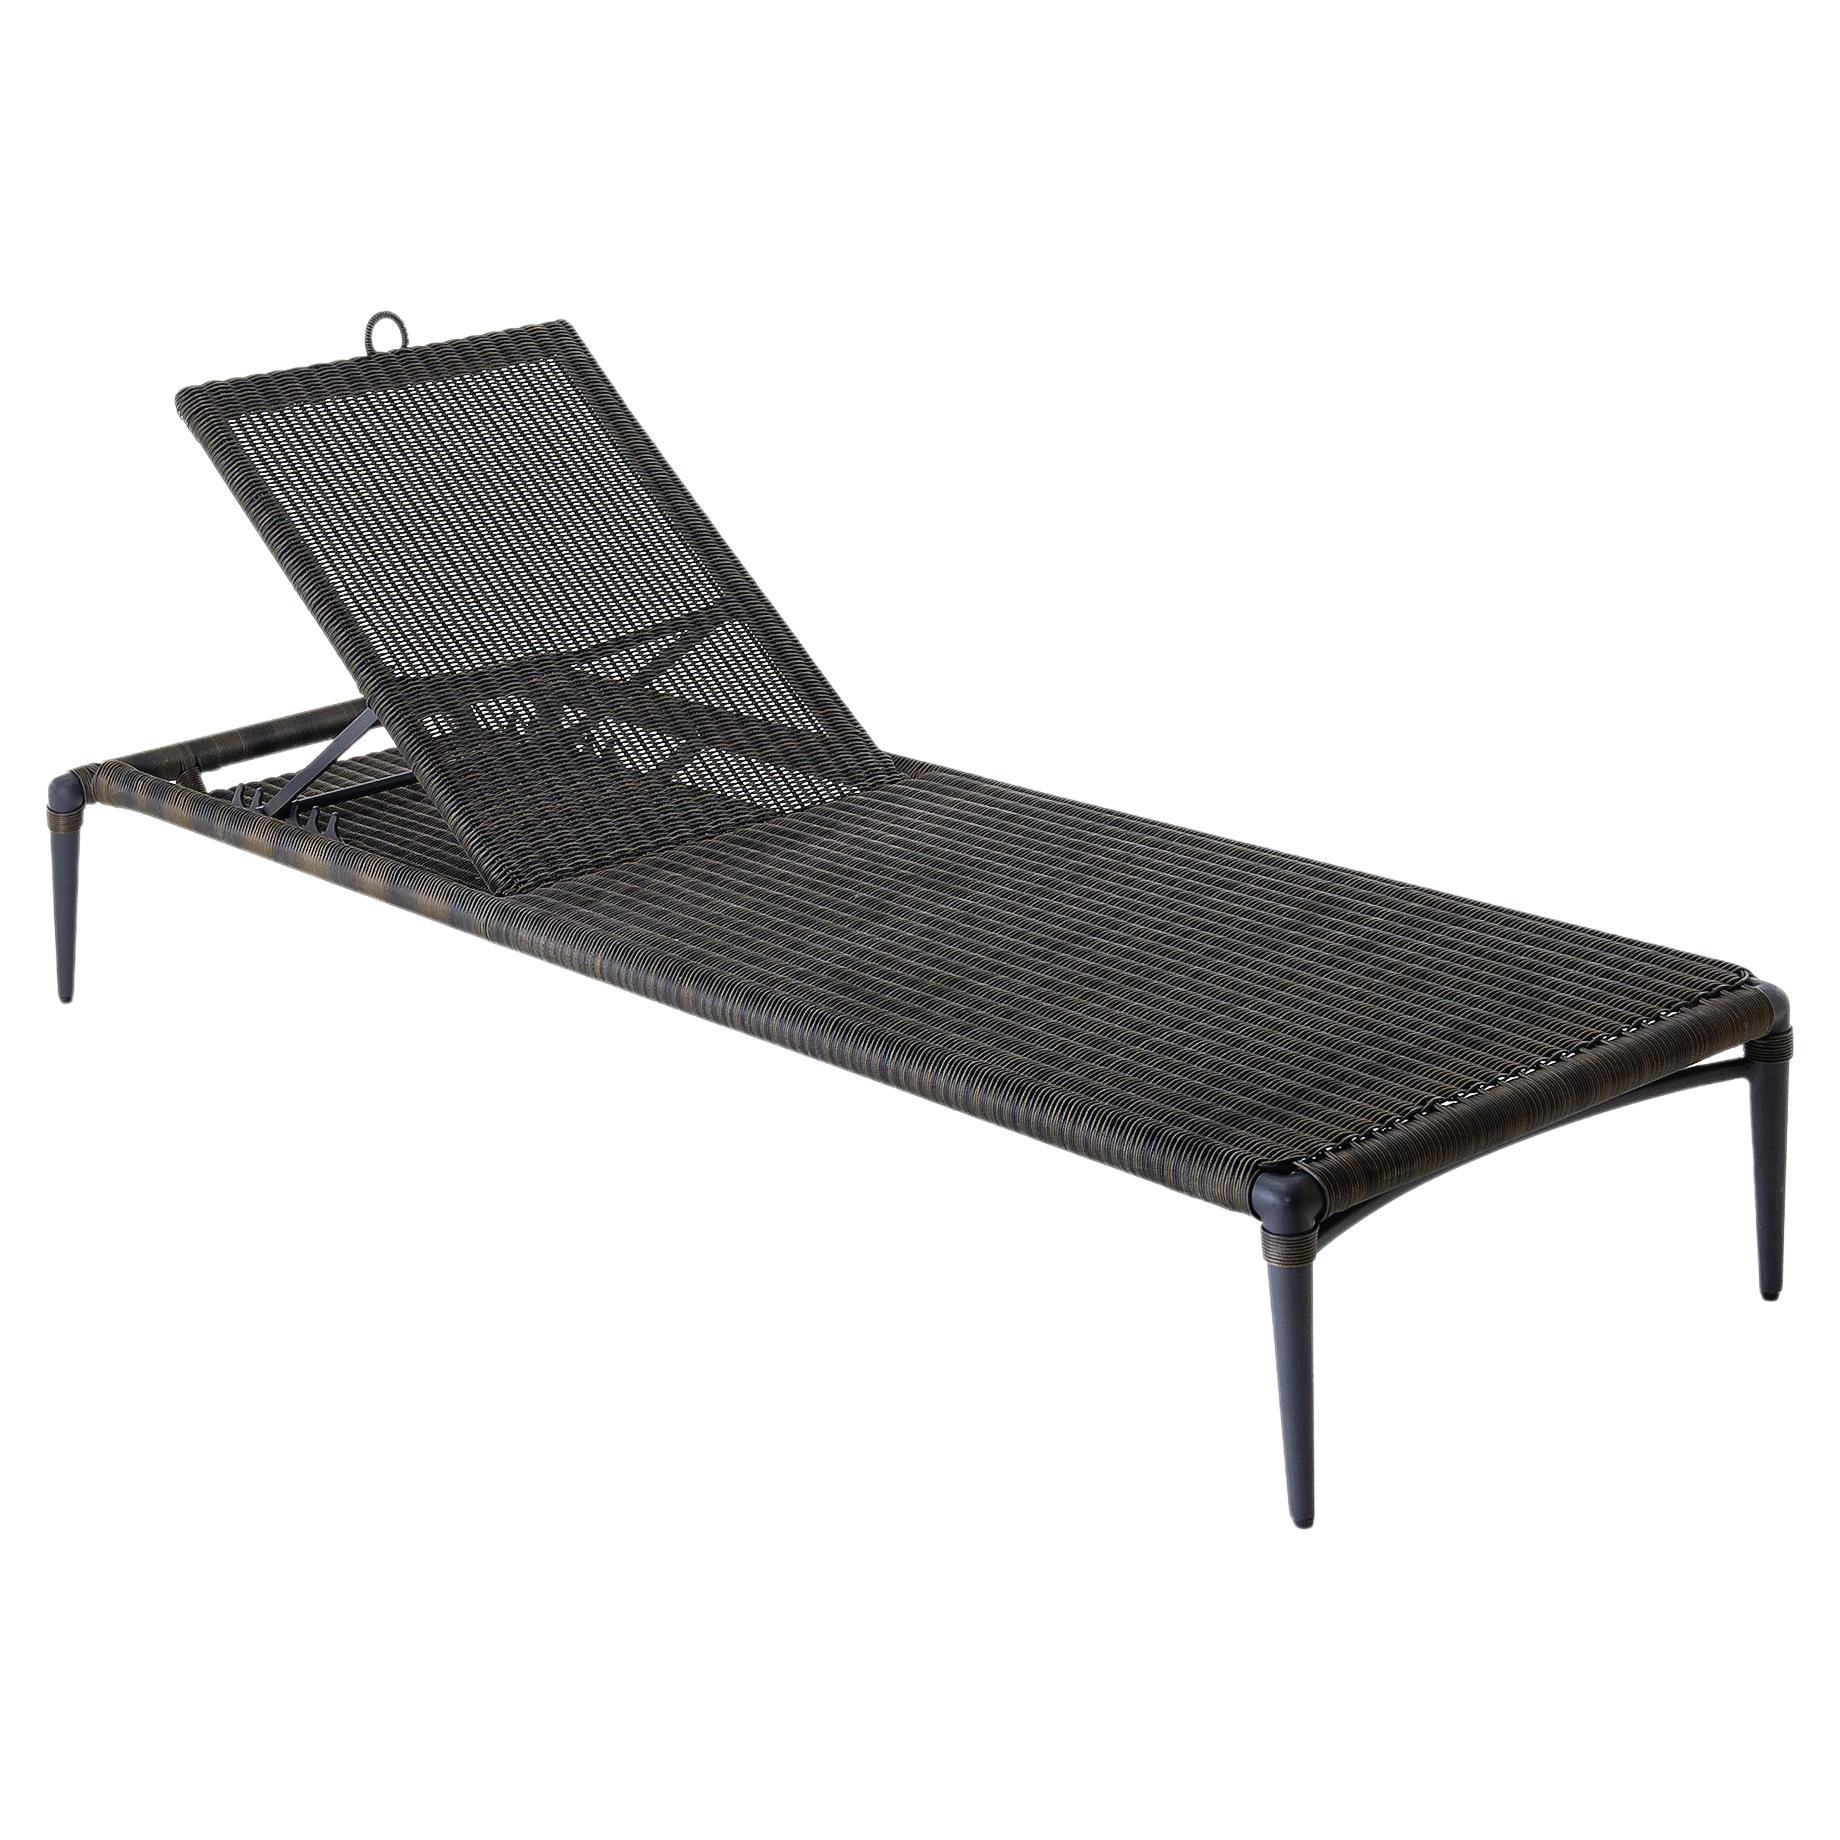 Unopiu' Experience Sunlounger Outdoor Collection For Sale